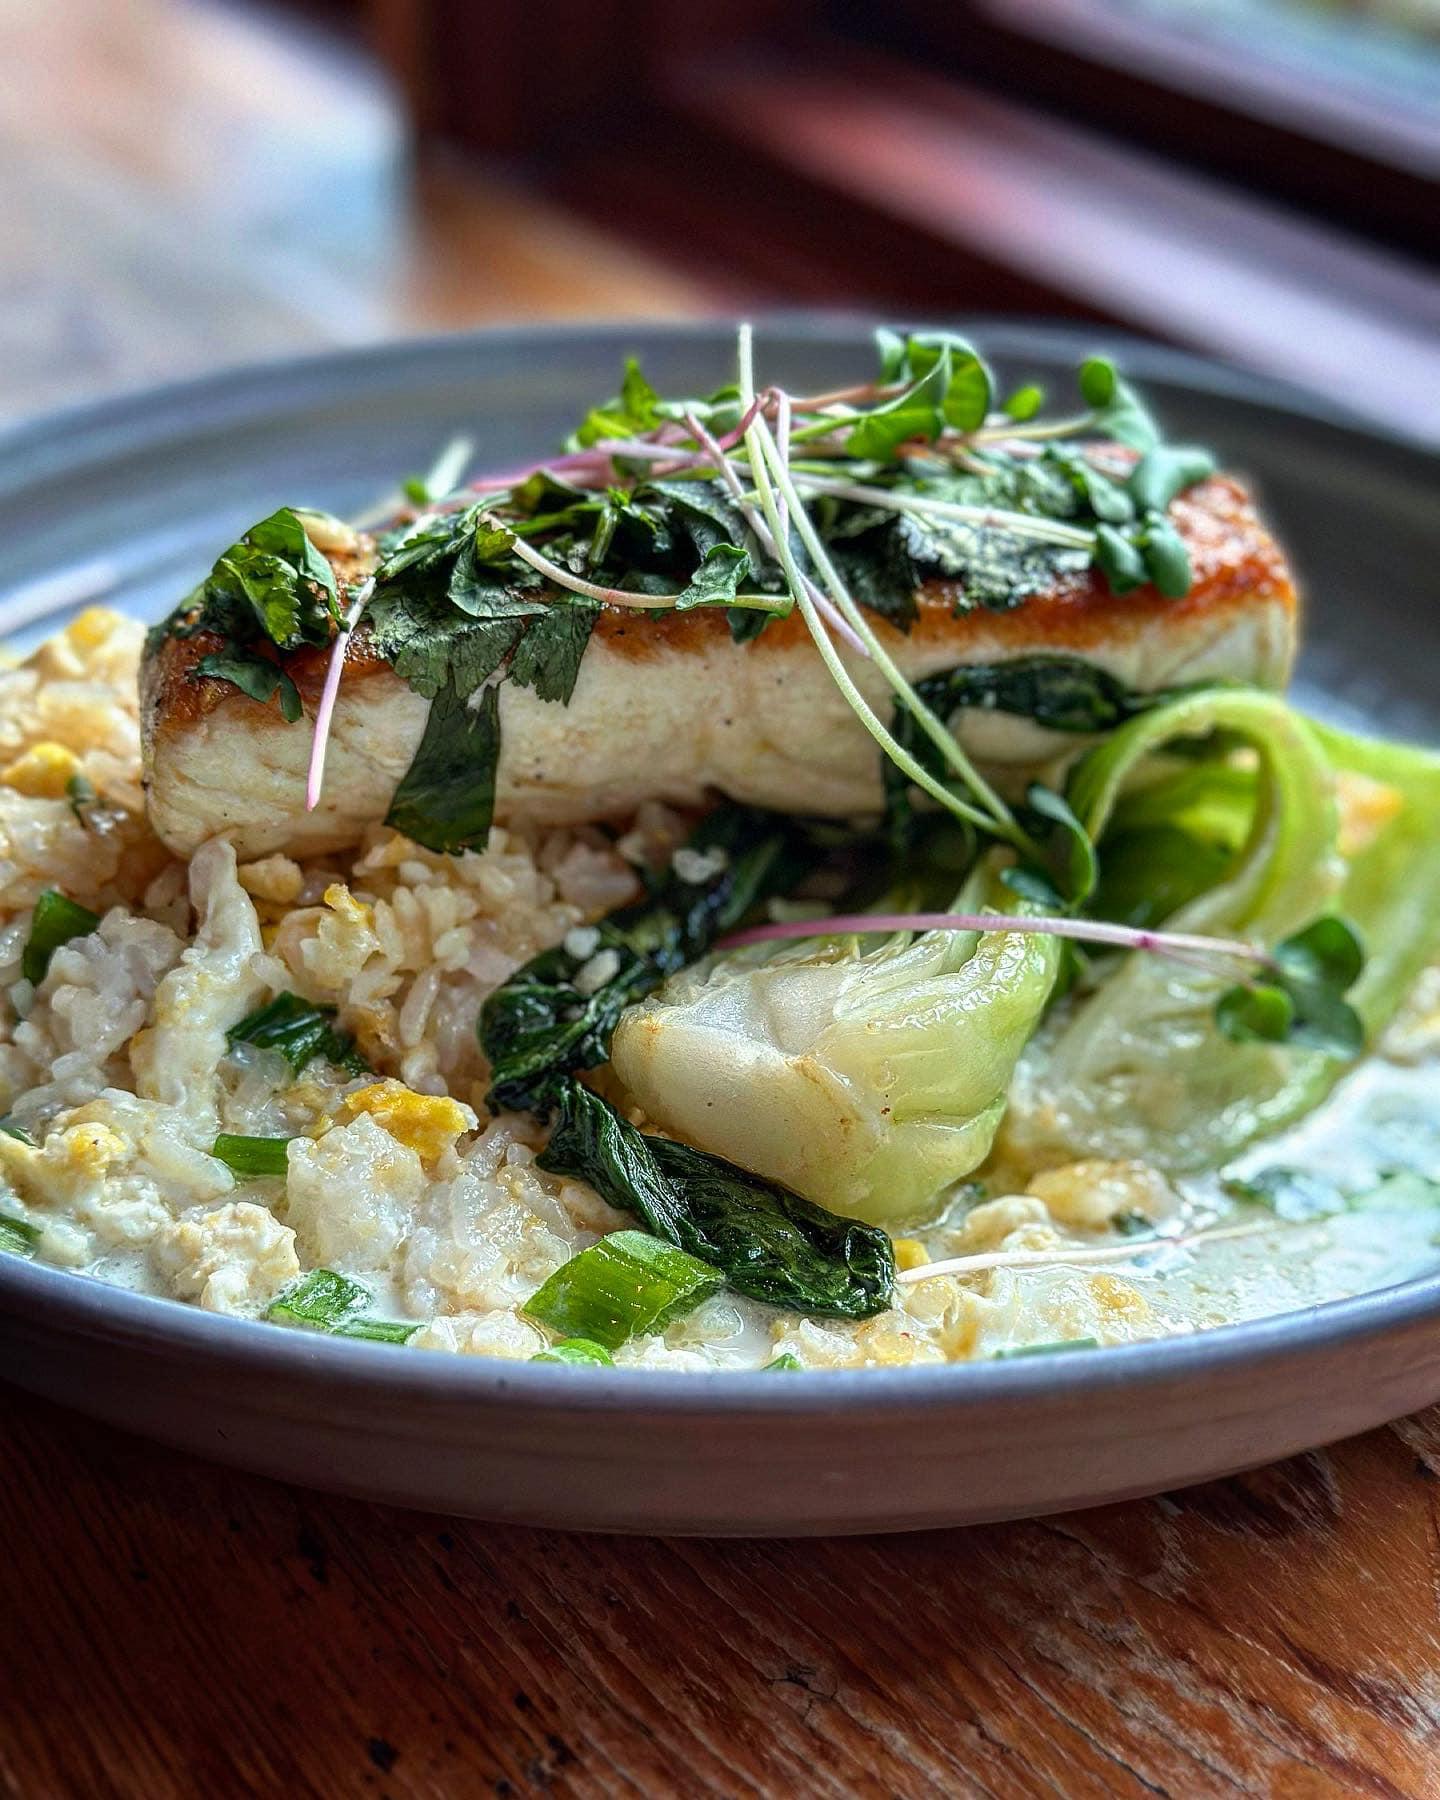 NEW MENU ITEM!! Try our Pan Roasted Halibut served lump crab fried rice, bok choy, lemon grass & in ginger broth! Try this and many other of our tasty menu items. Book your reservation today! 